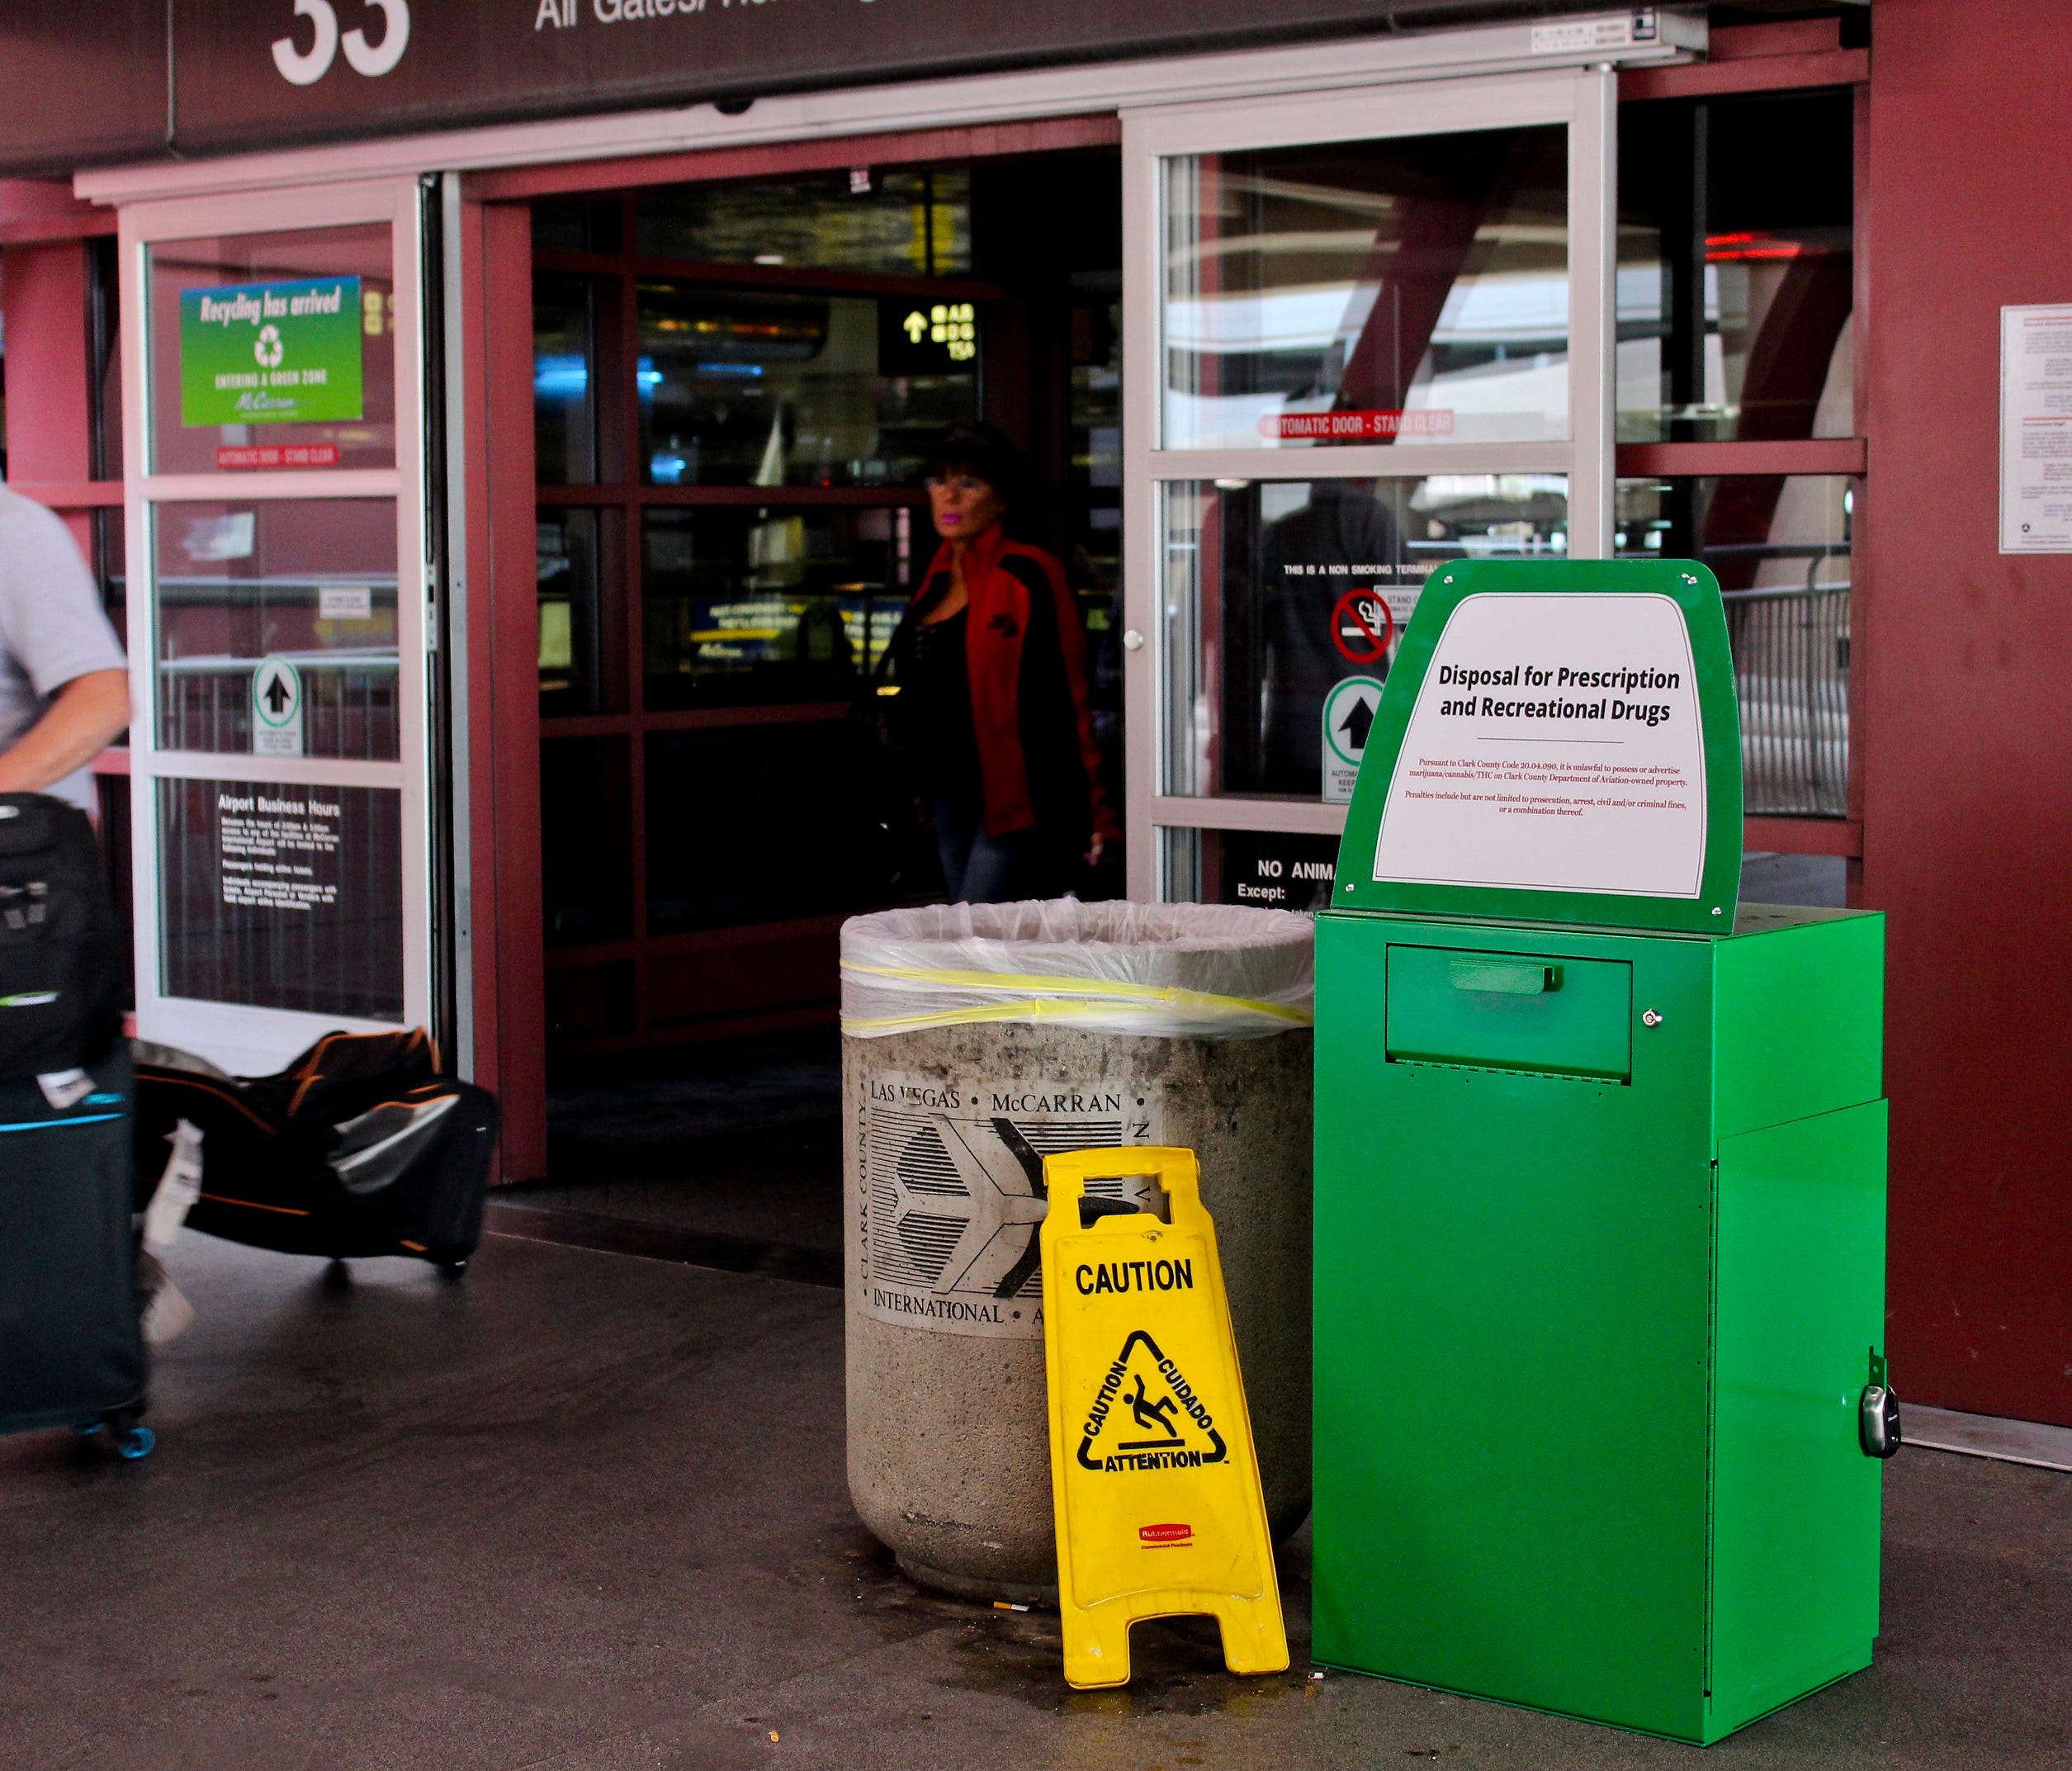 Unidentified travelers exit the airport past a green metal container designed for 